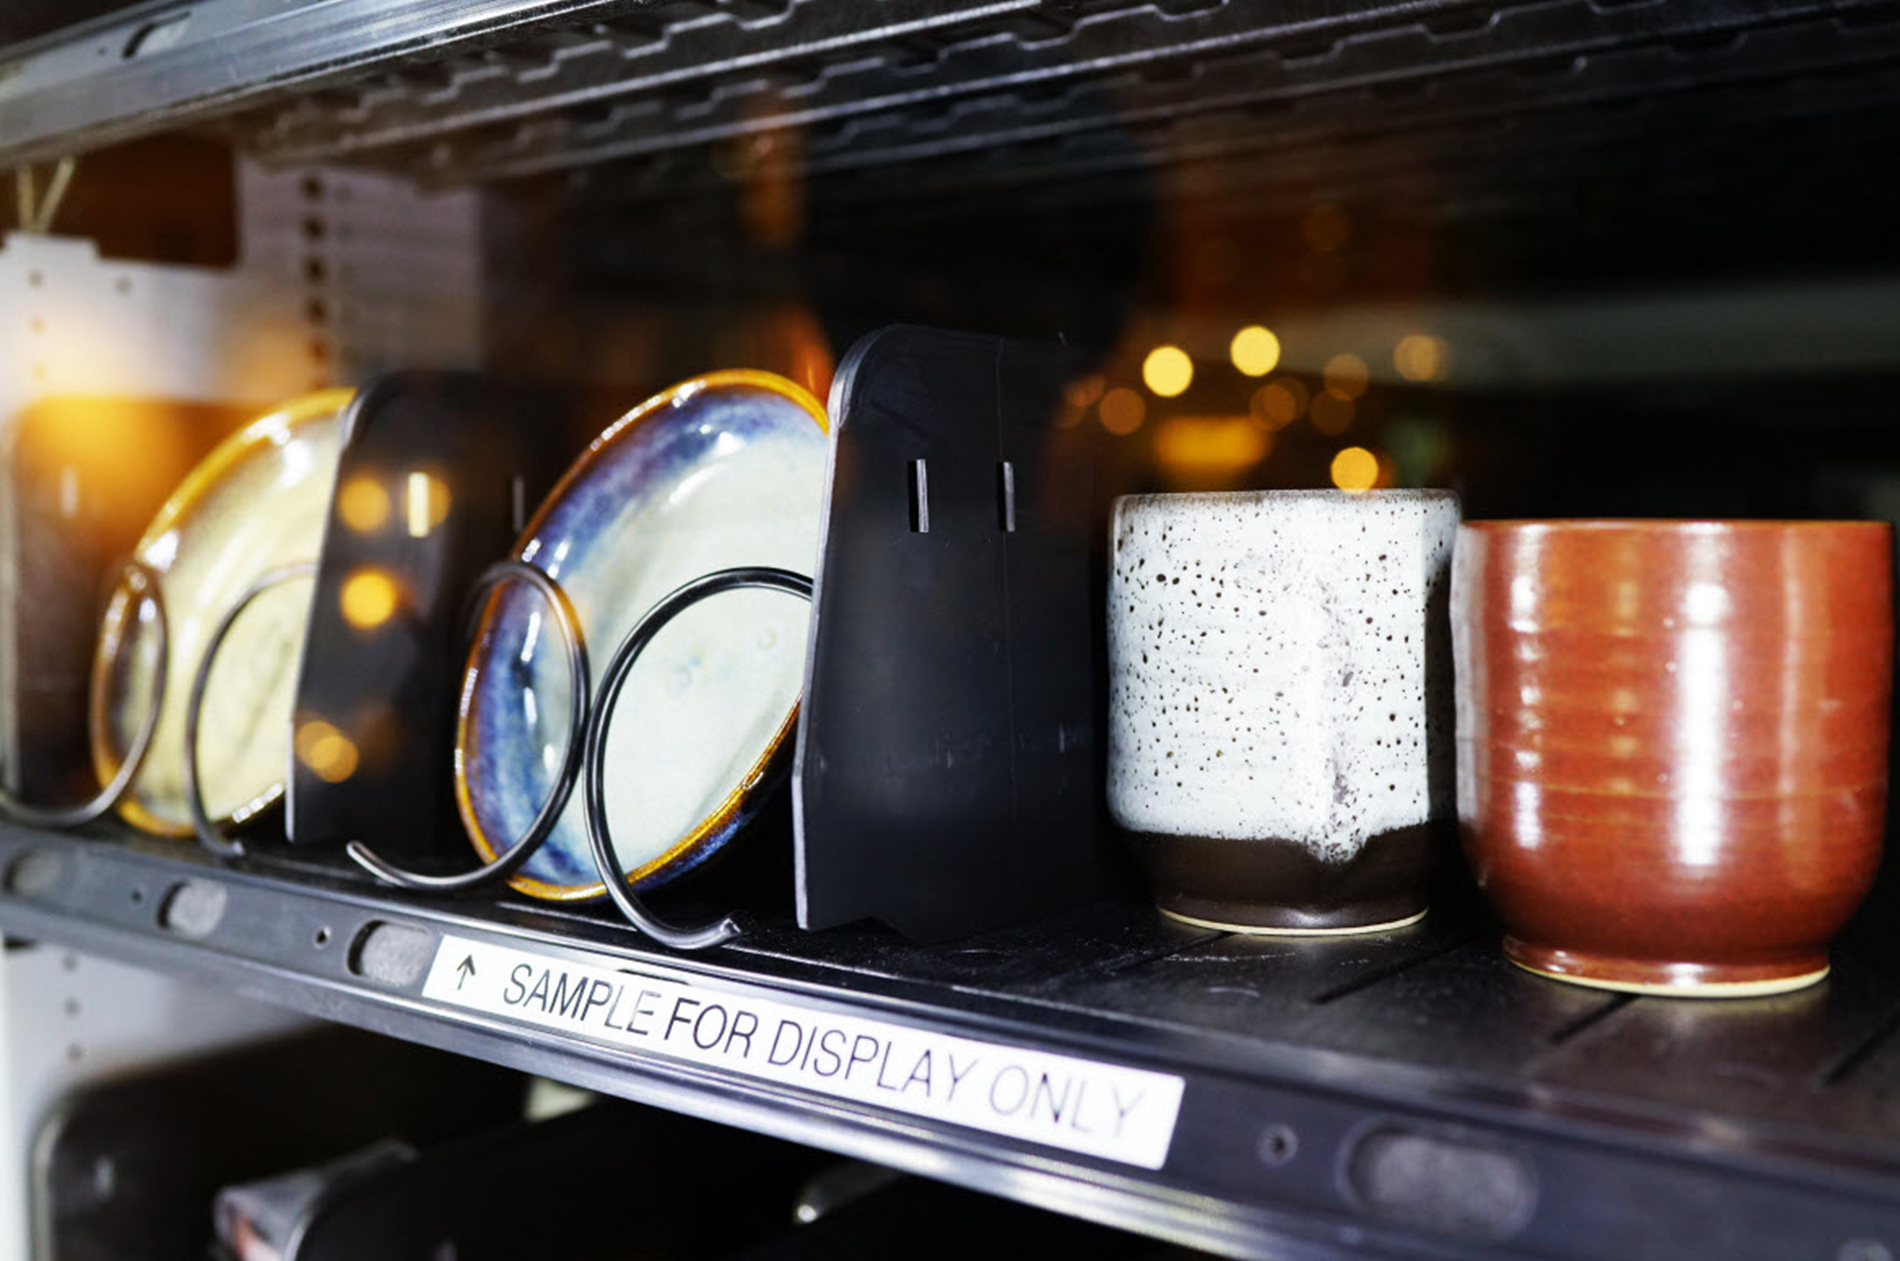 18-year-old SOTA student, Hans Chew hand-threw 360 ceramics over two months and placed them in a vending machine to challenge his audience to think about how much they value art.